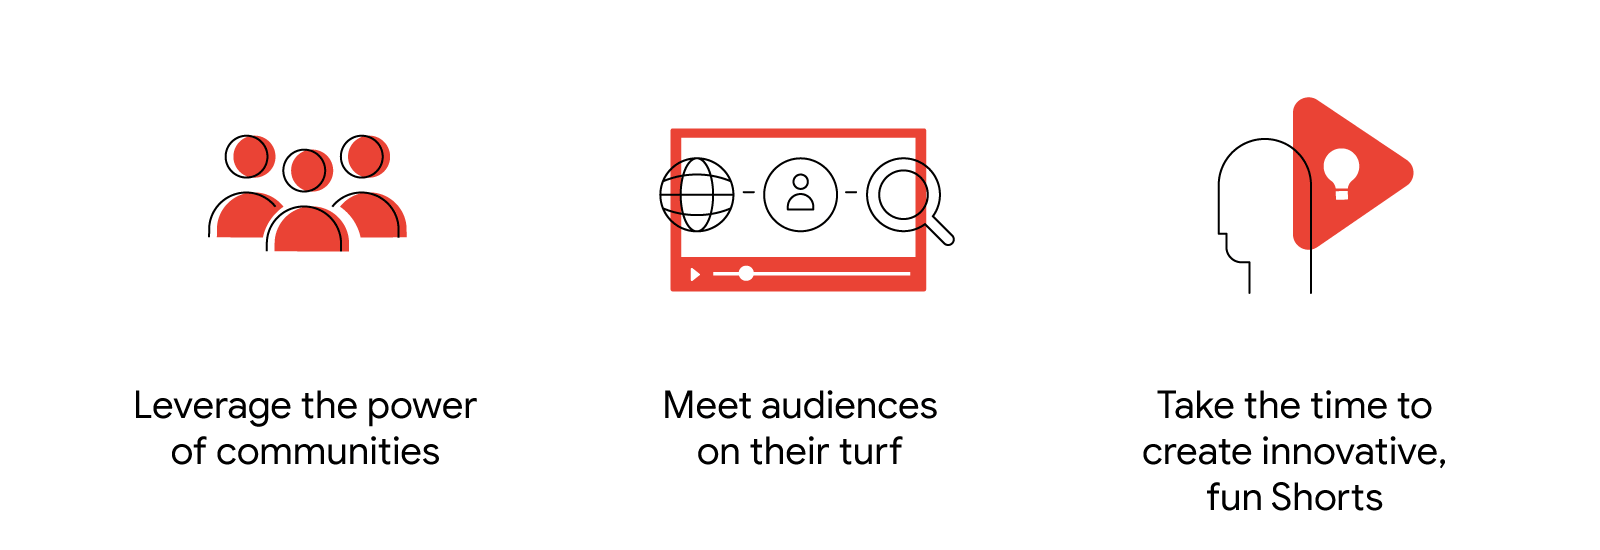 3 people icons: Leverage the power of communities. Video screen with globe, people, and search icons: Meet audiences on their turf. Silhouette under a YouTube Play button: Take the time to create, innovative fun Shorts.